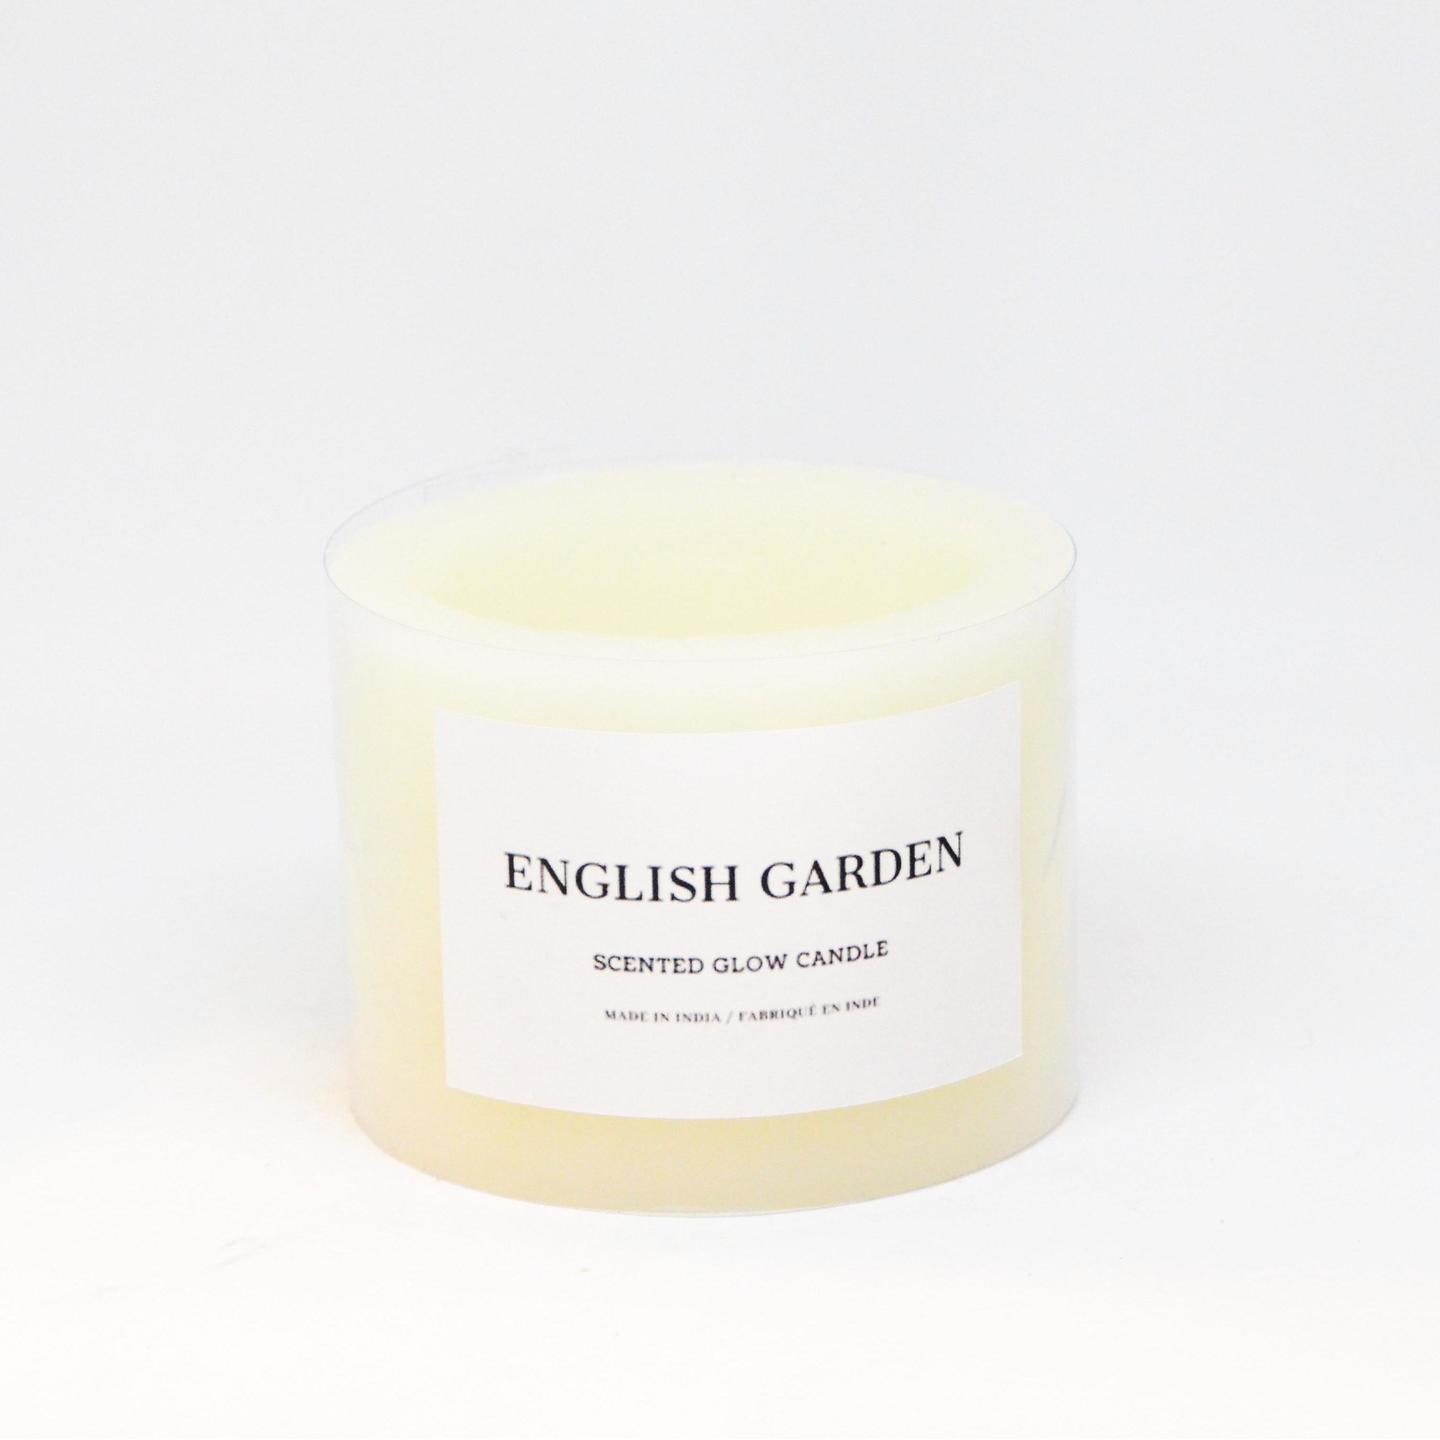 Scented Glow Candle - English Garden